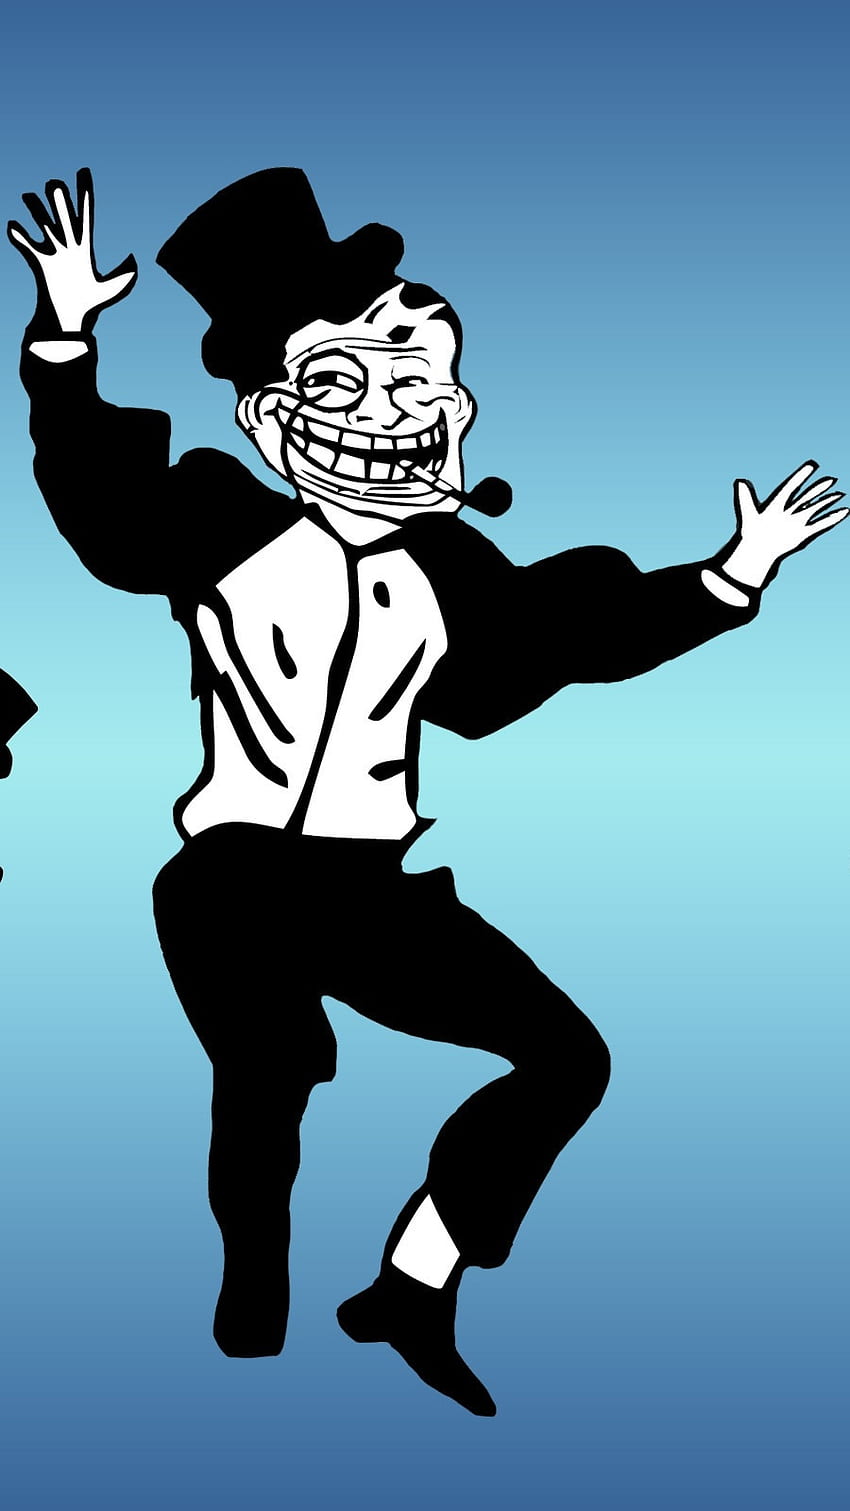 1366x768px, 720P Free download | Funny Memes, Troll Face, Dancing HD ...